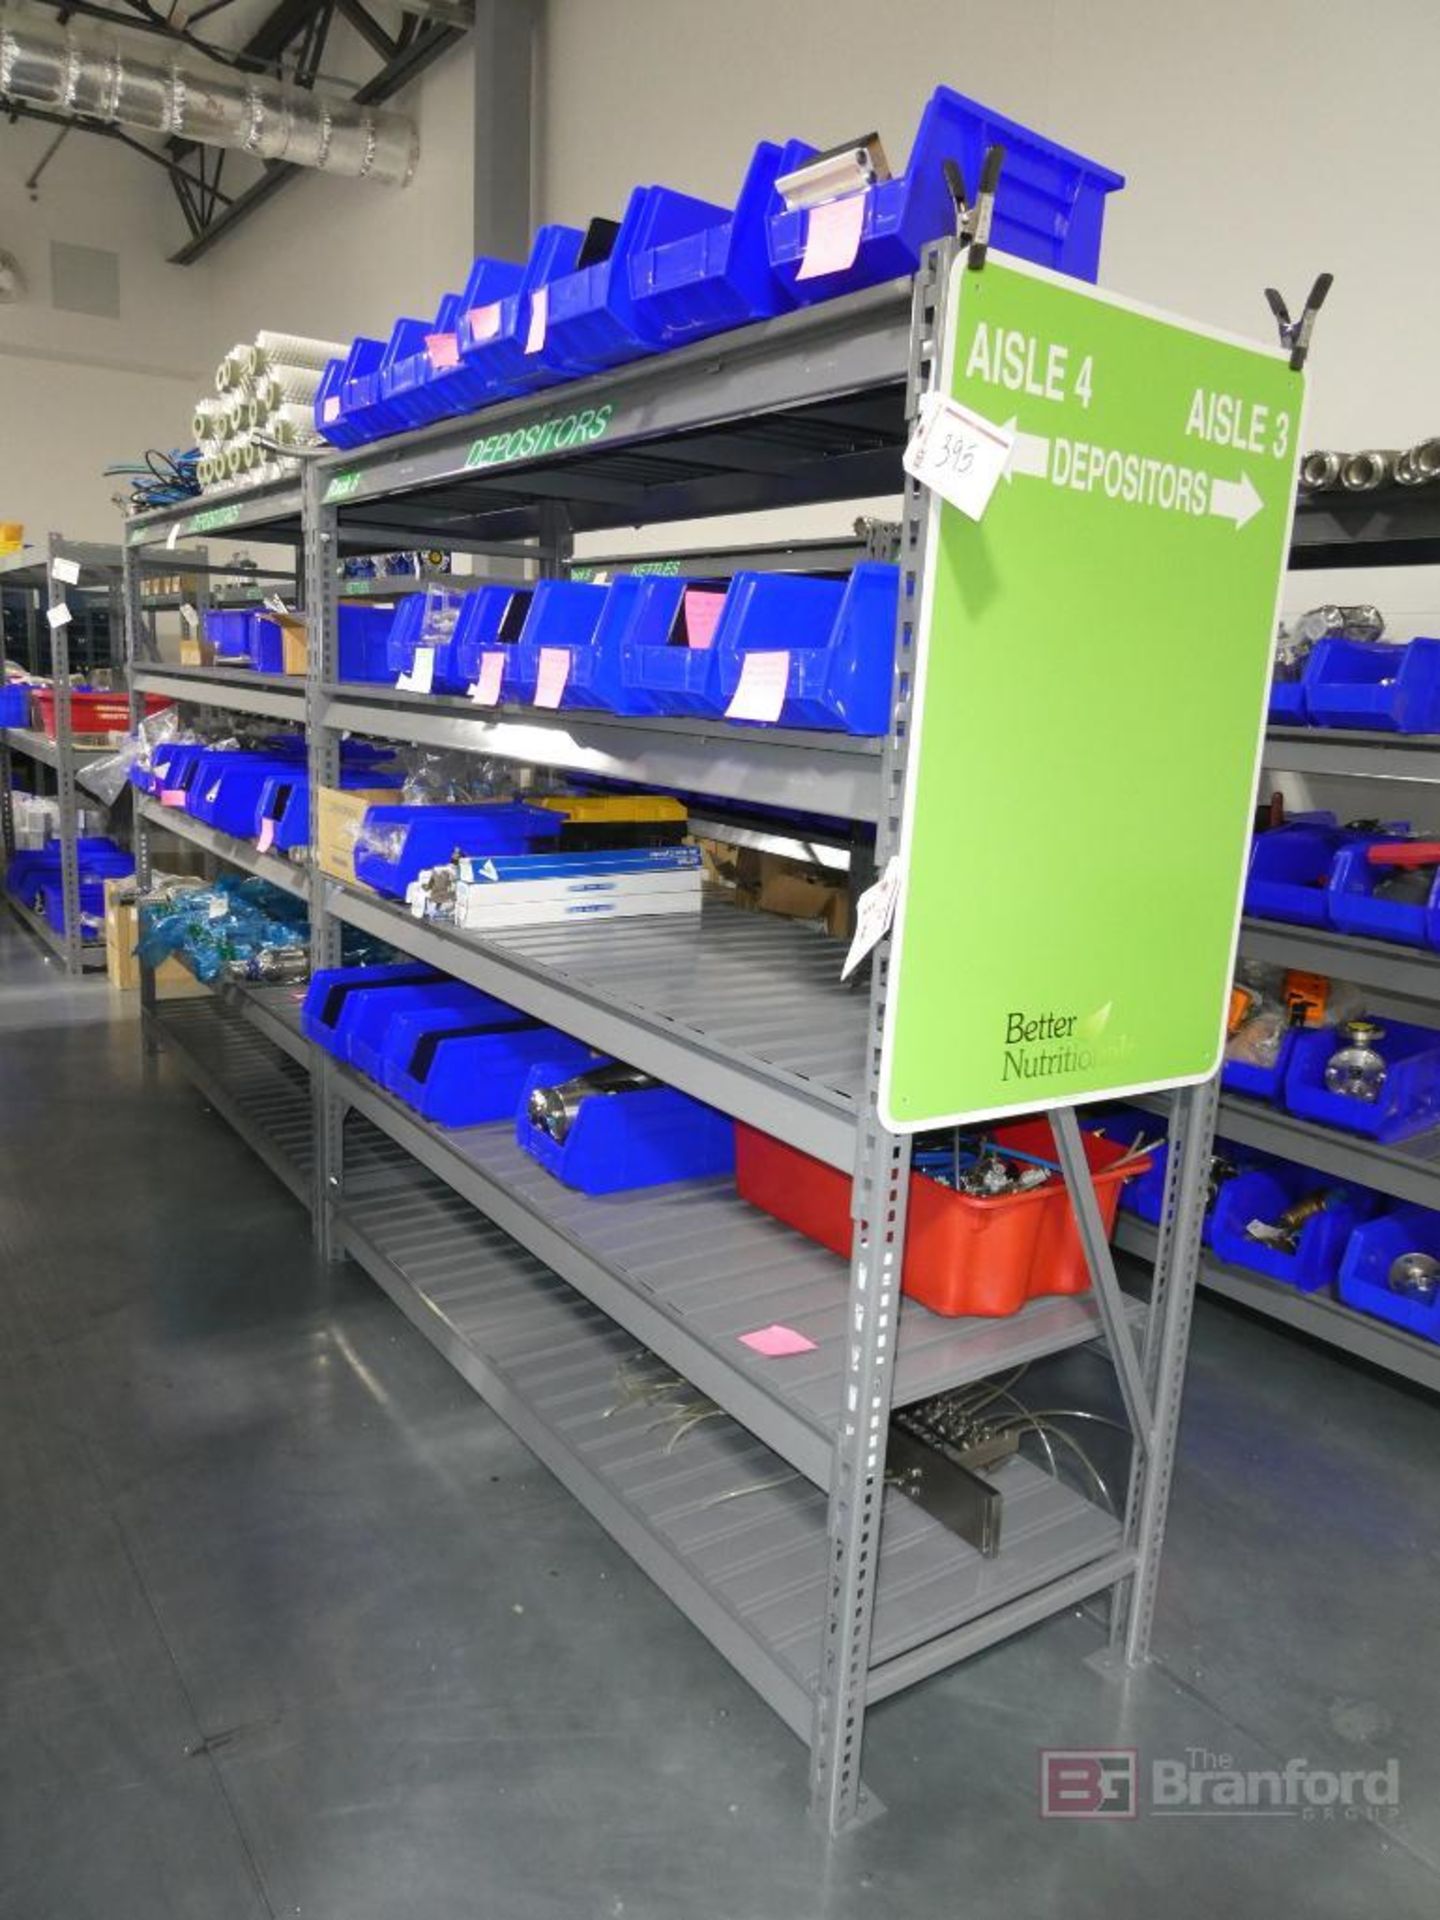 (2) Racks of Depositor Machine Parts and Accessories (Racks not Included)